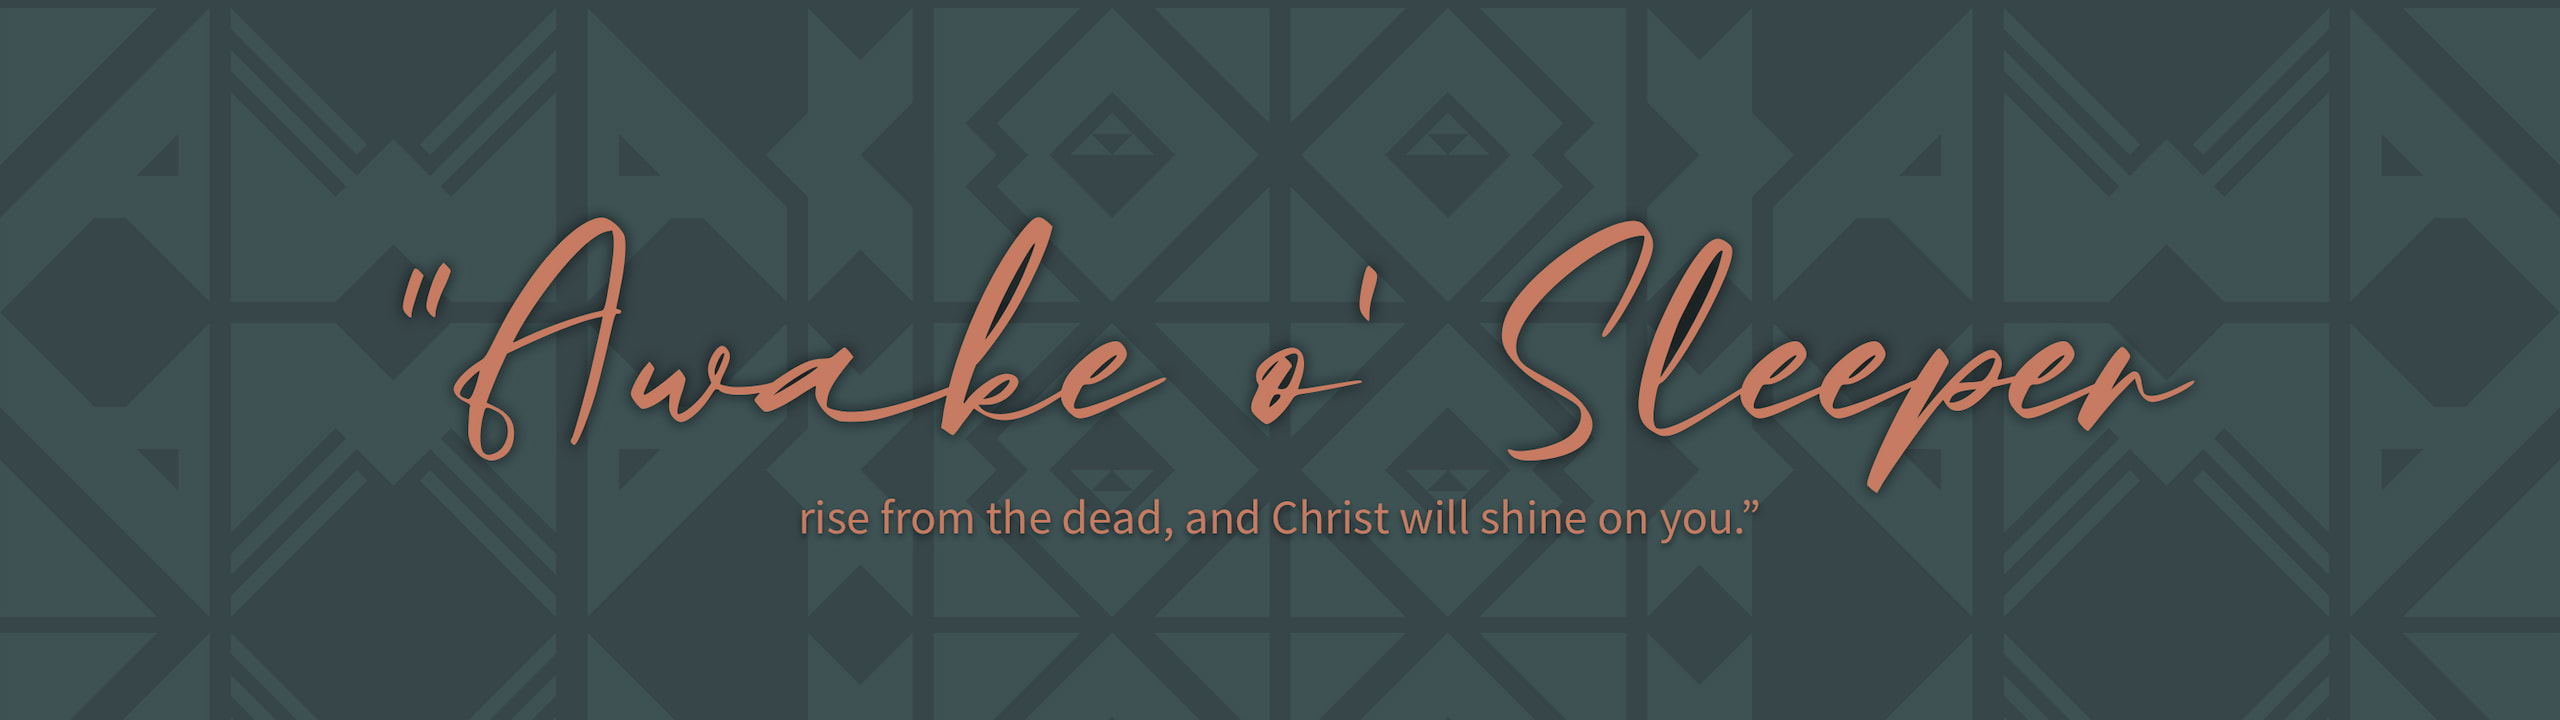 "Awake o' Sleeper, rise from the dead, and Christ will shine on you."